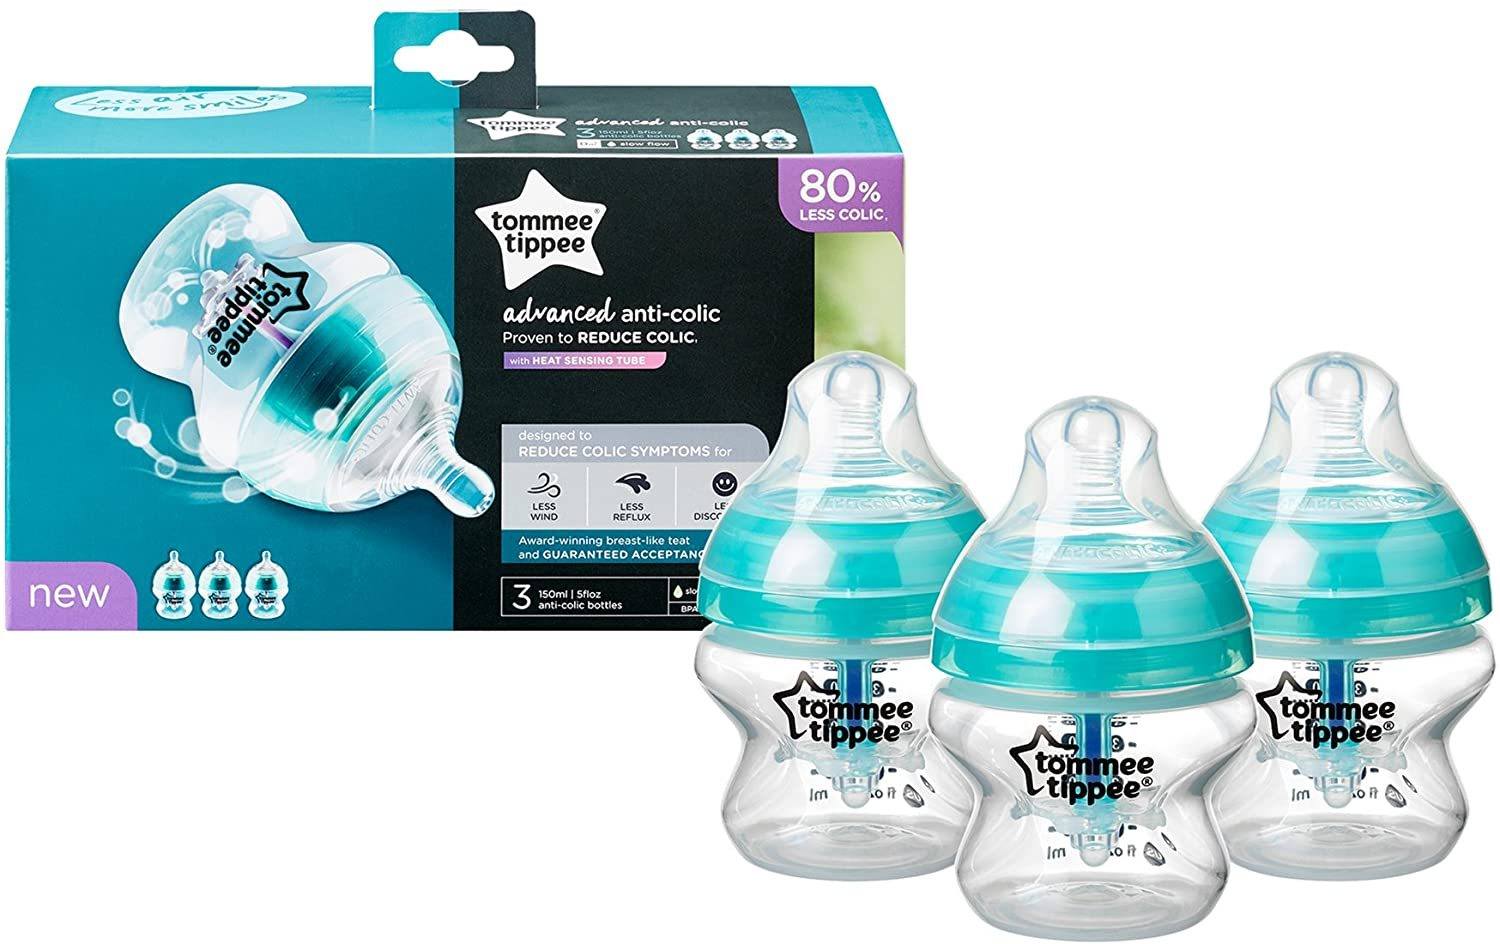 Tomme tippee - Kit de 3 mamadeiras 150 ml Anne Claire Baby Store 